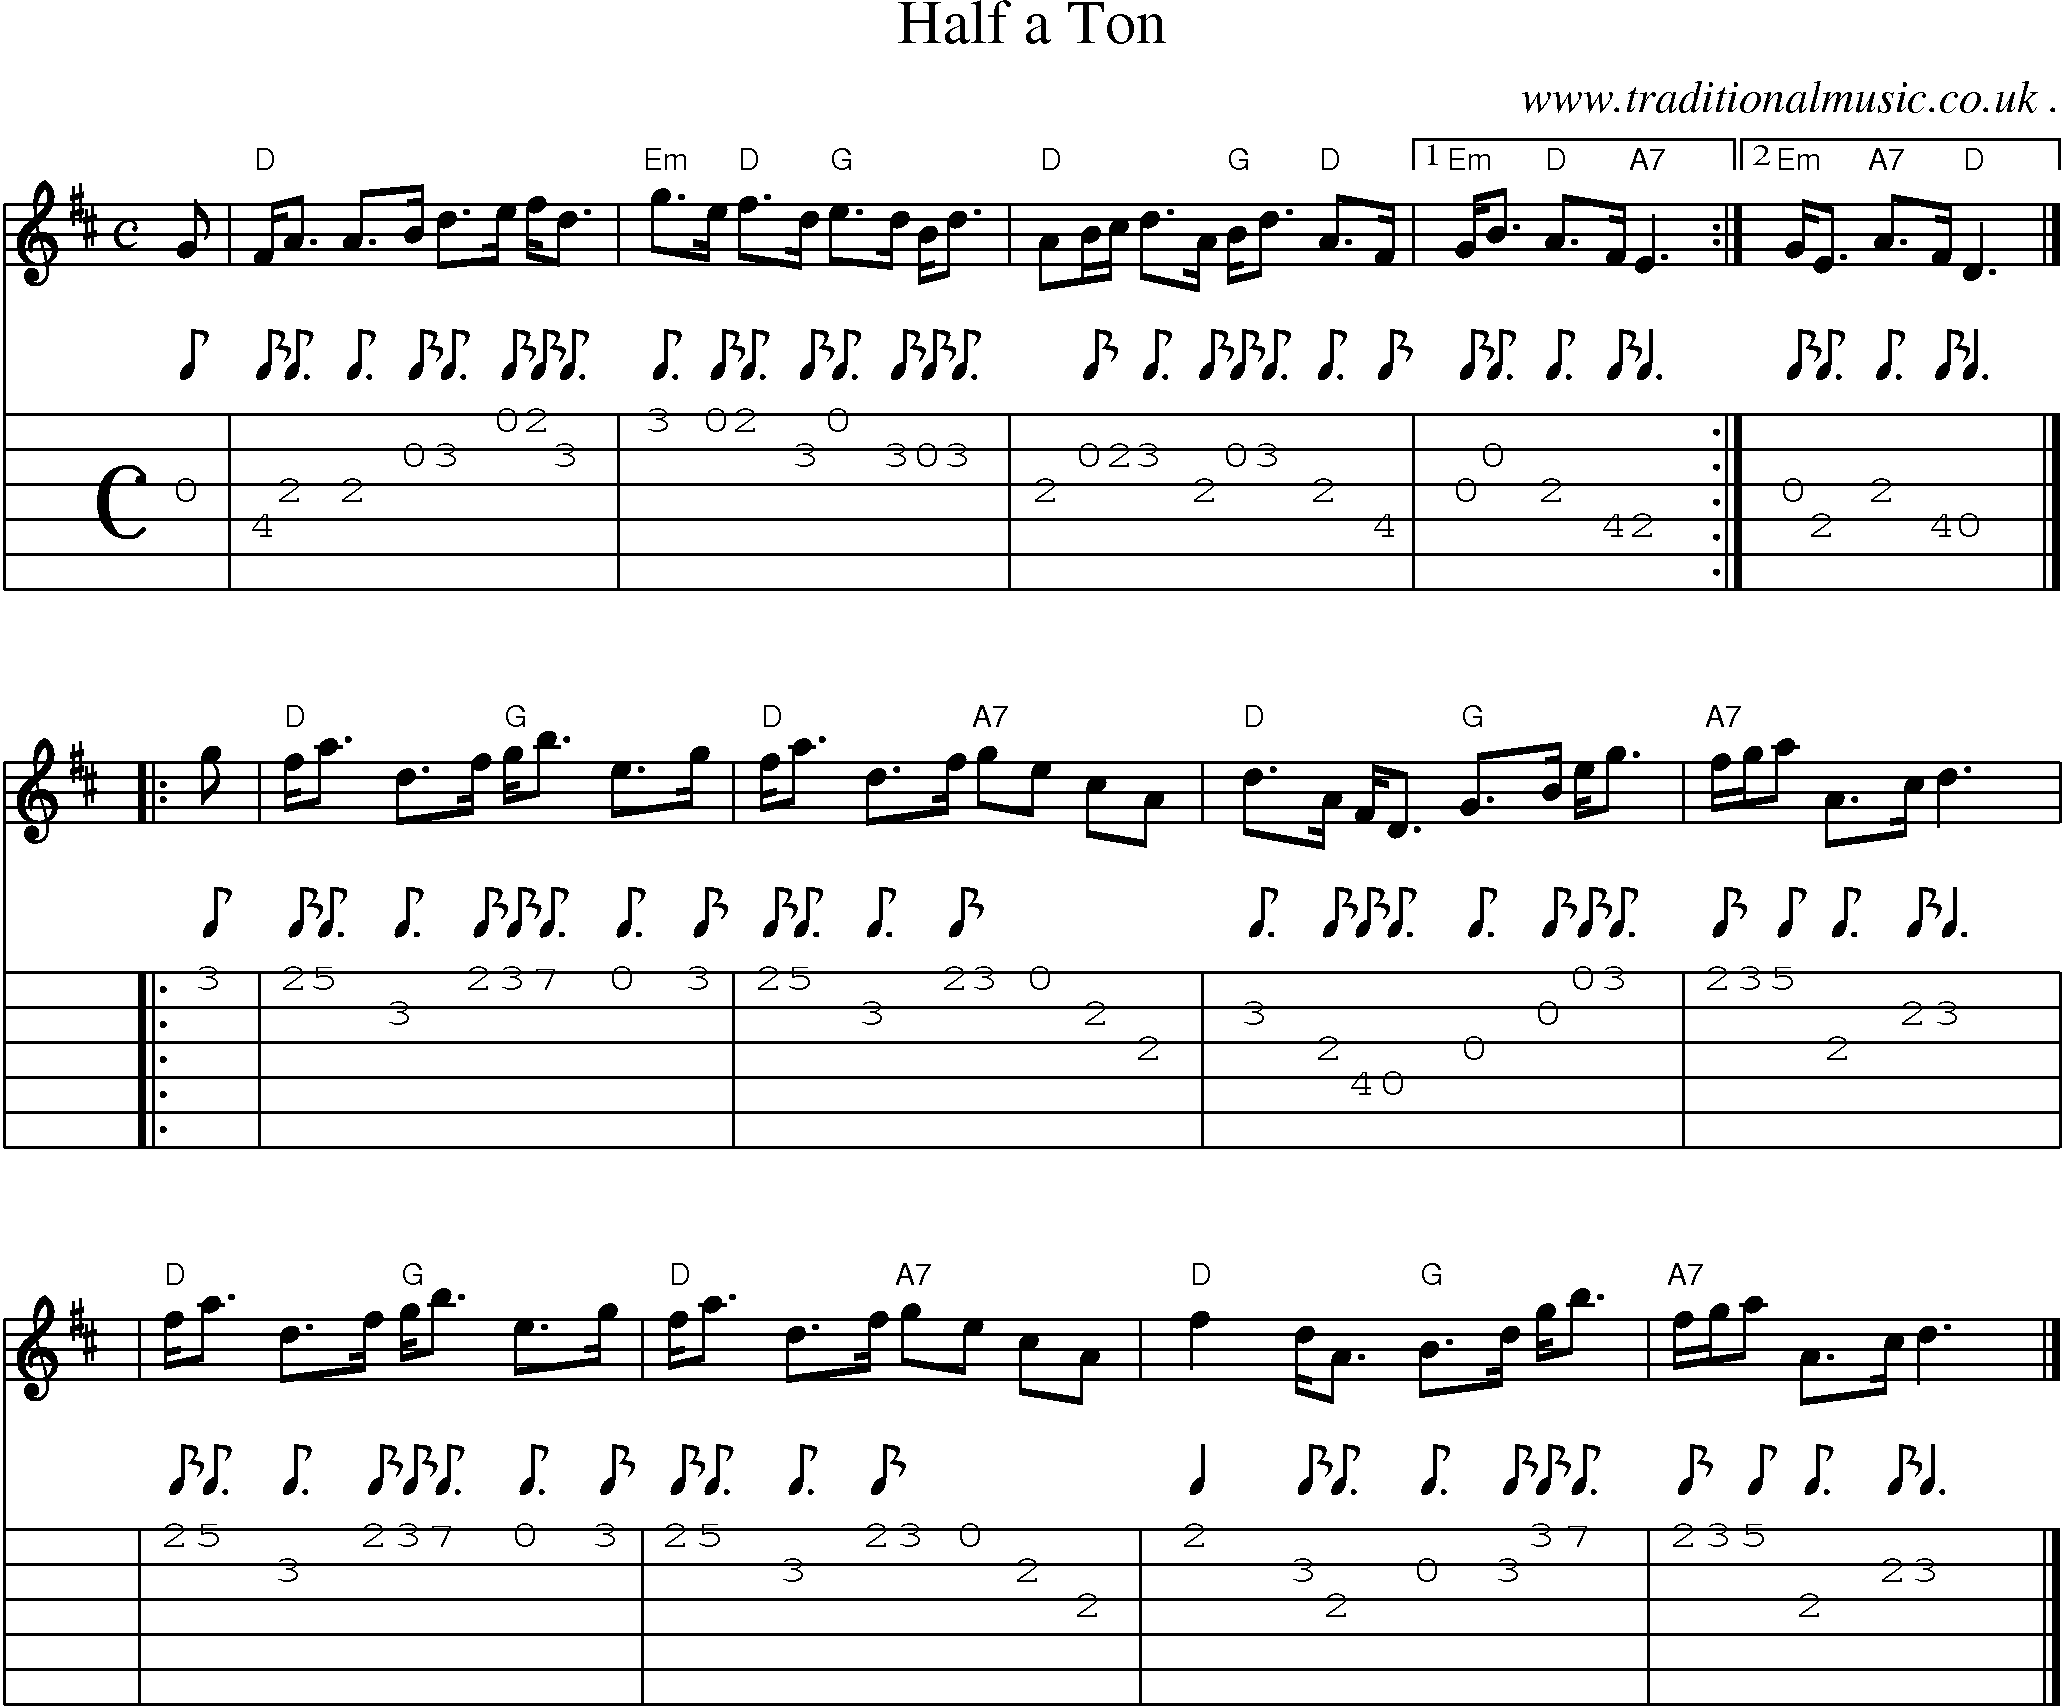 Sheet-music  score, Chords and Guitar Tabs for Half A Ton